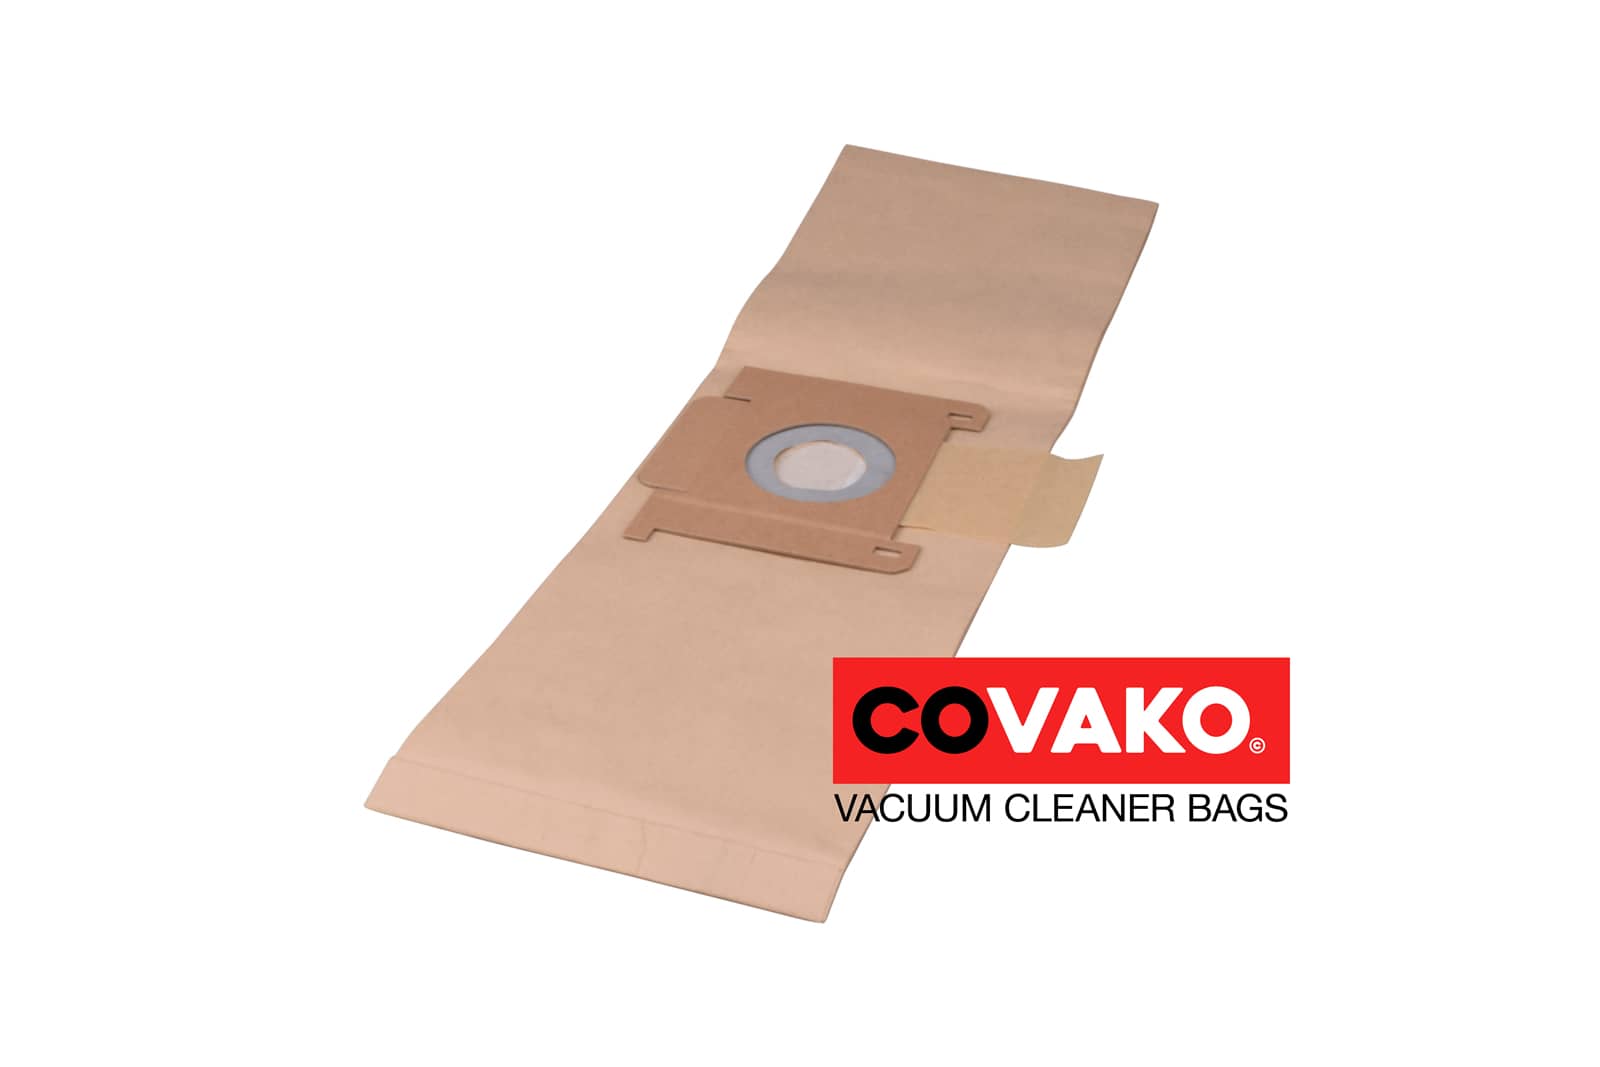 Clean a la Card Steady Extra 6.0 / Paper - Clean a la Card vacuum cleaner bags